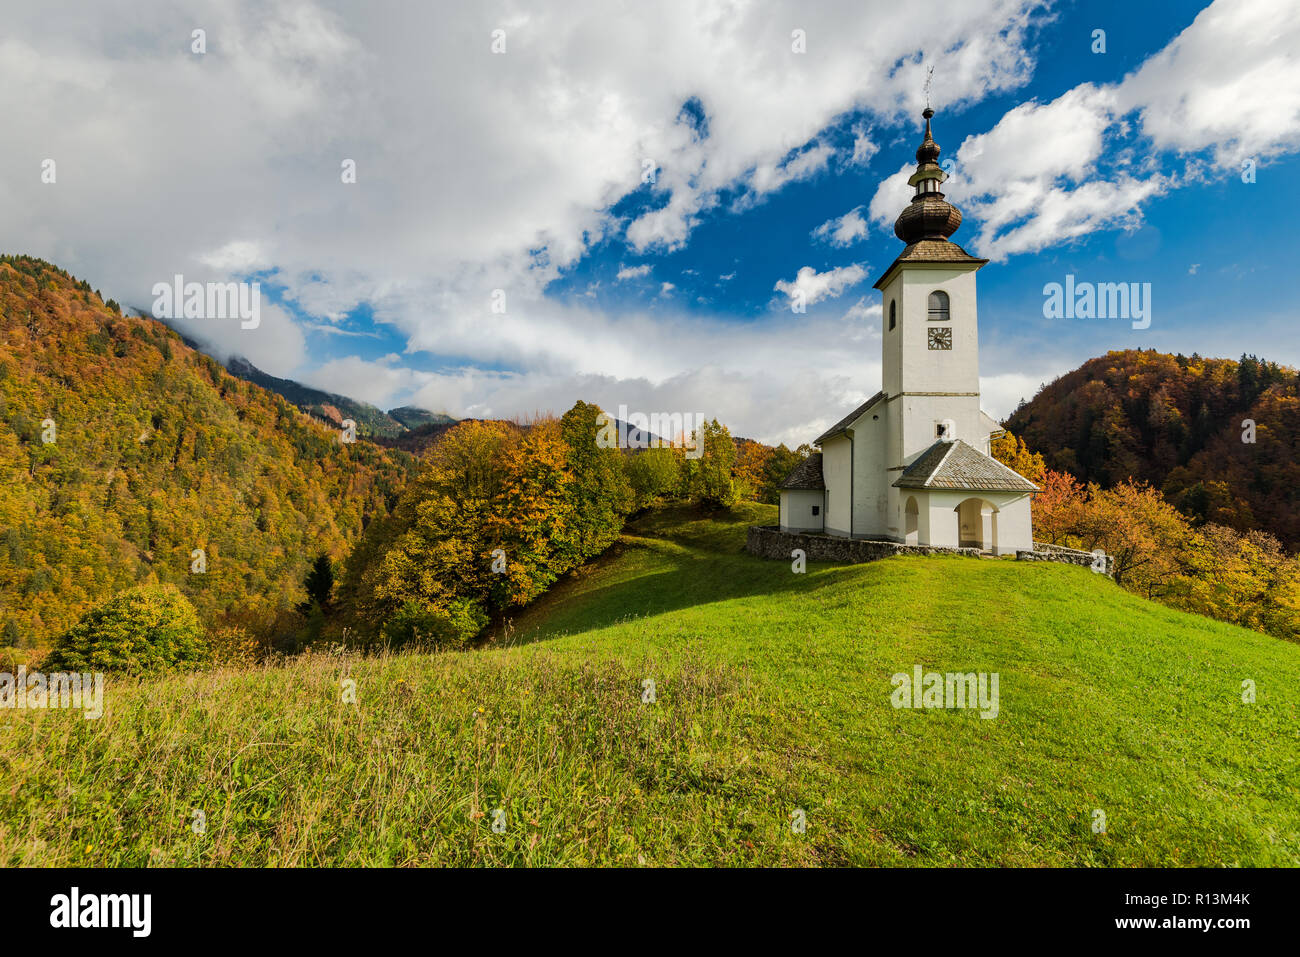 Undiscovered rural chapel or church in Slovenia mountains. Stock Photo